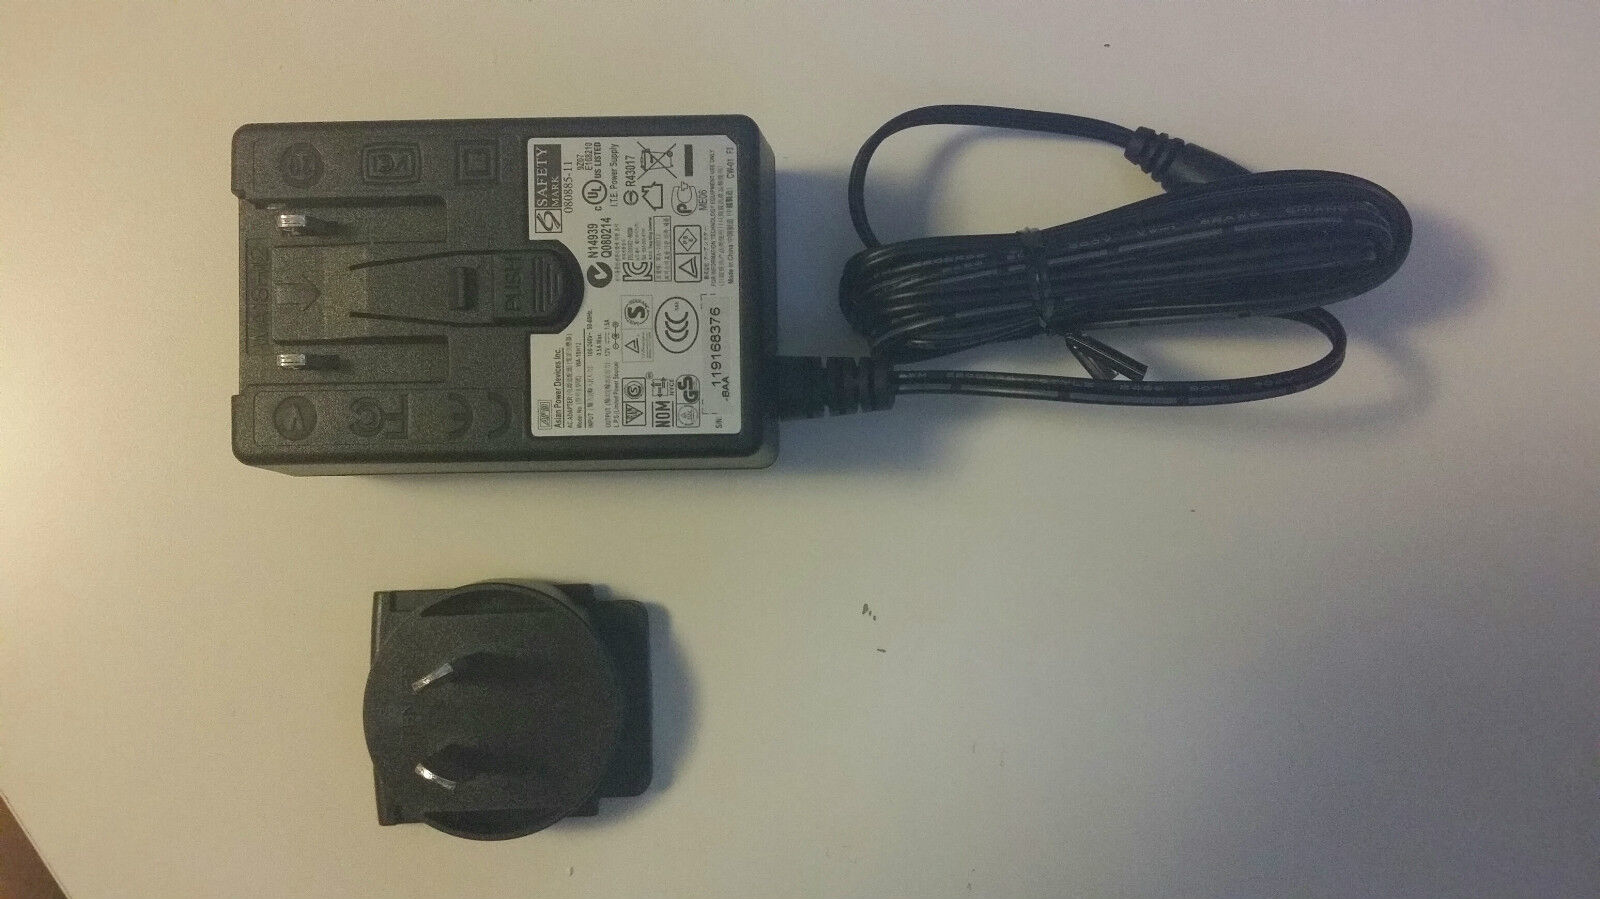 AC Adapter Charger Cord For Braun Shaver Models 7893S 5771 7799cc-6 Power Supply Type Cable MPN Does not Apply Product